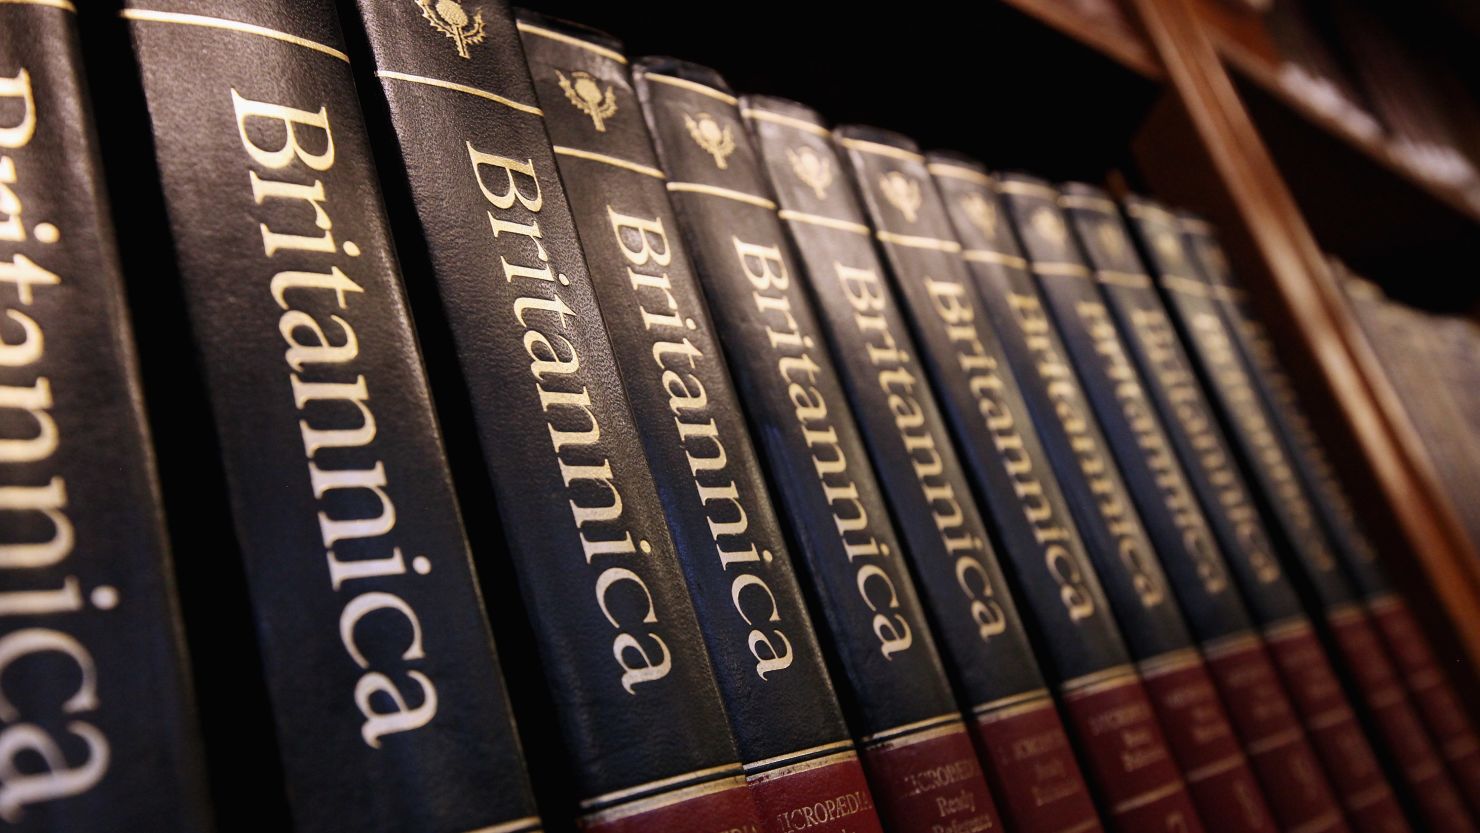 After 244 years, the print version of the Encyclopedia Britannica is being discontinued.